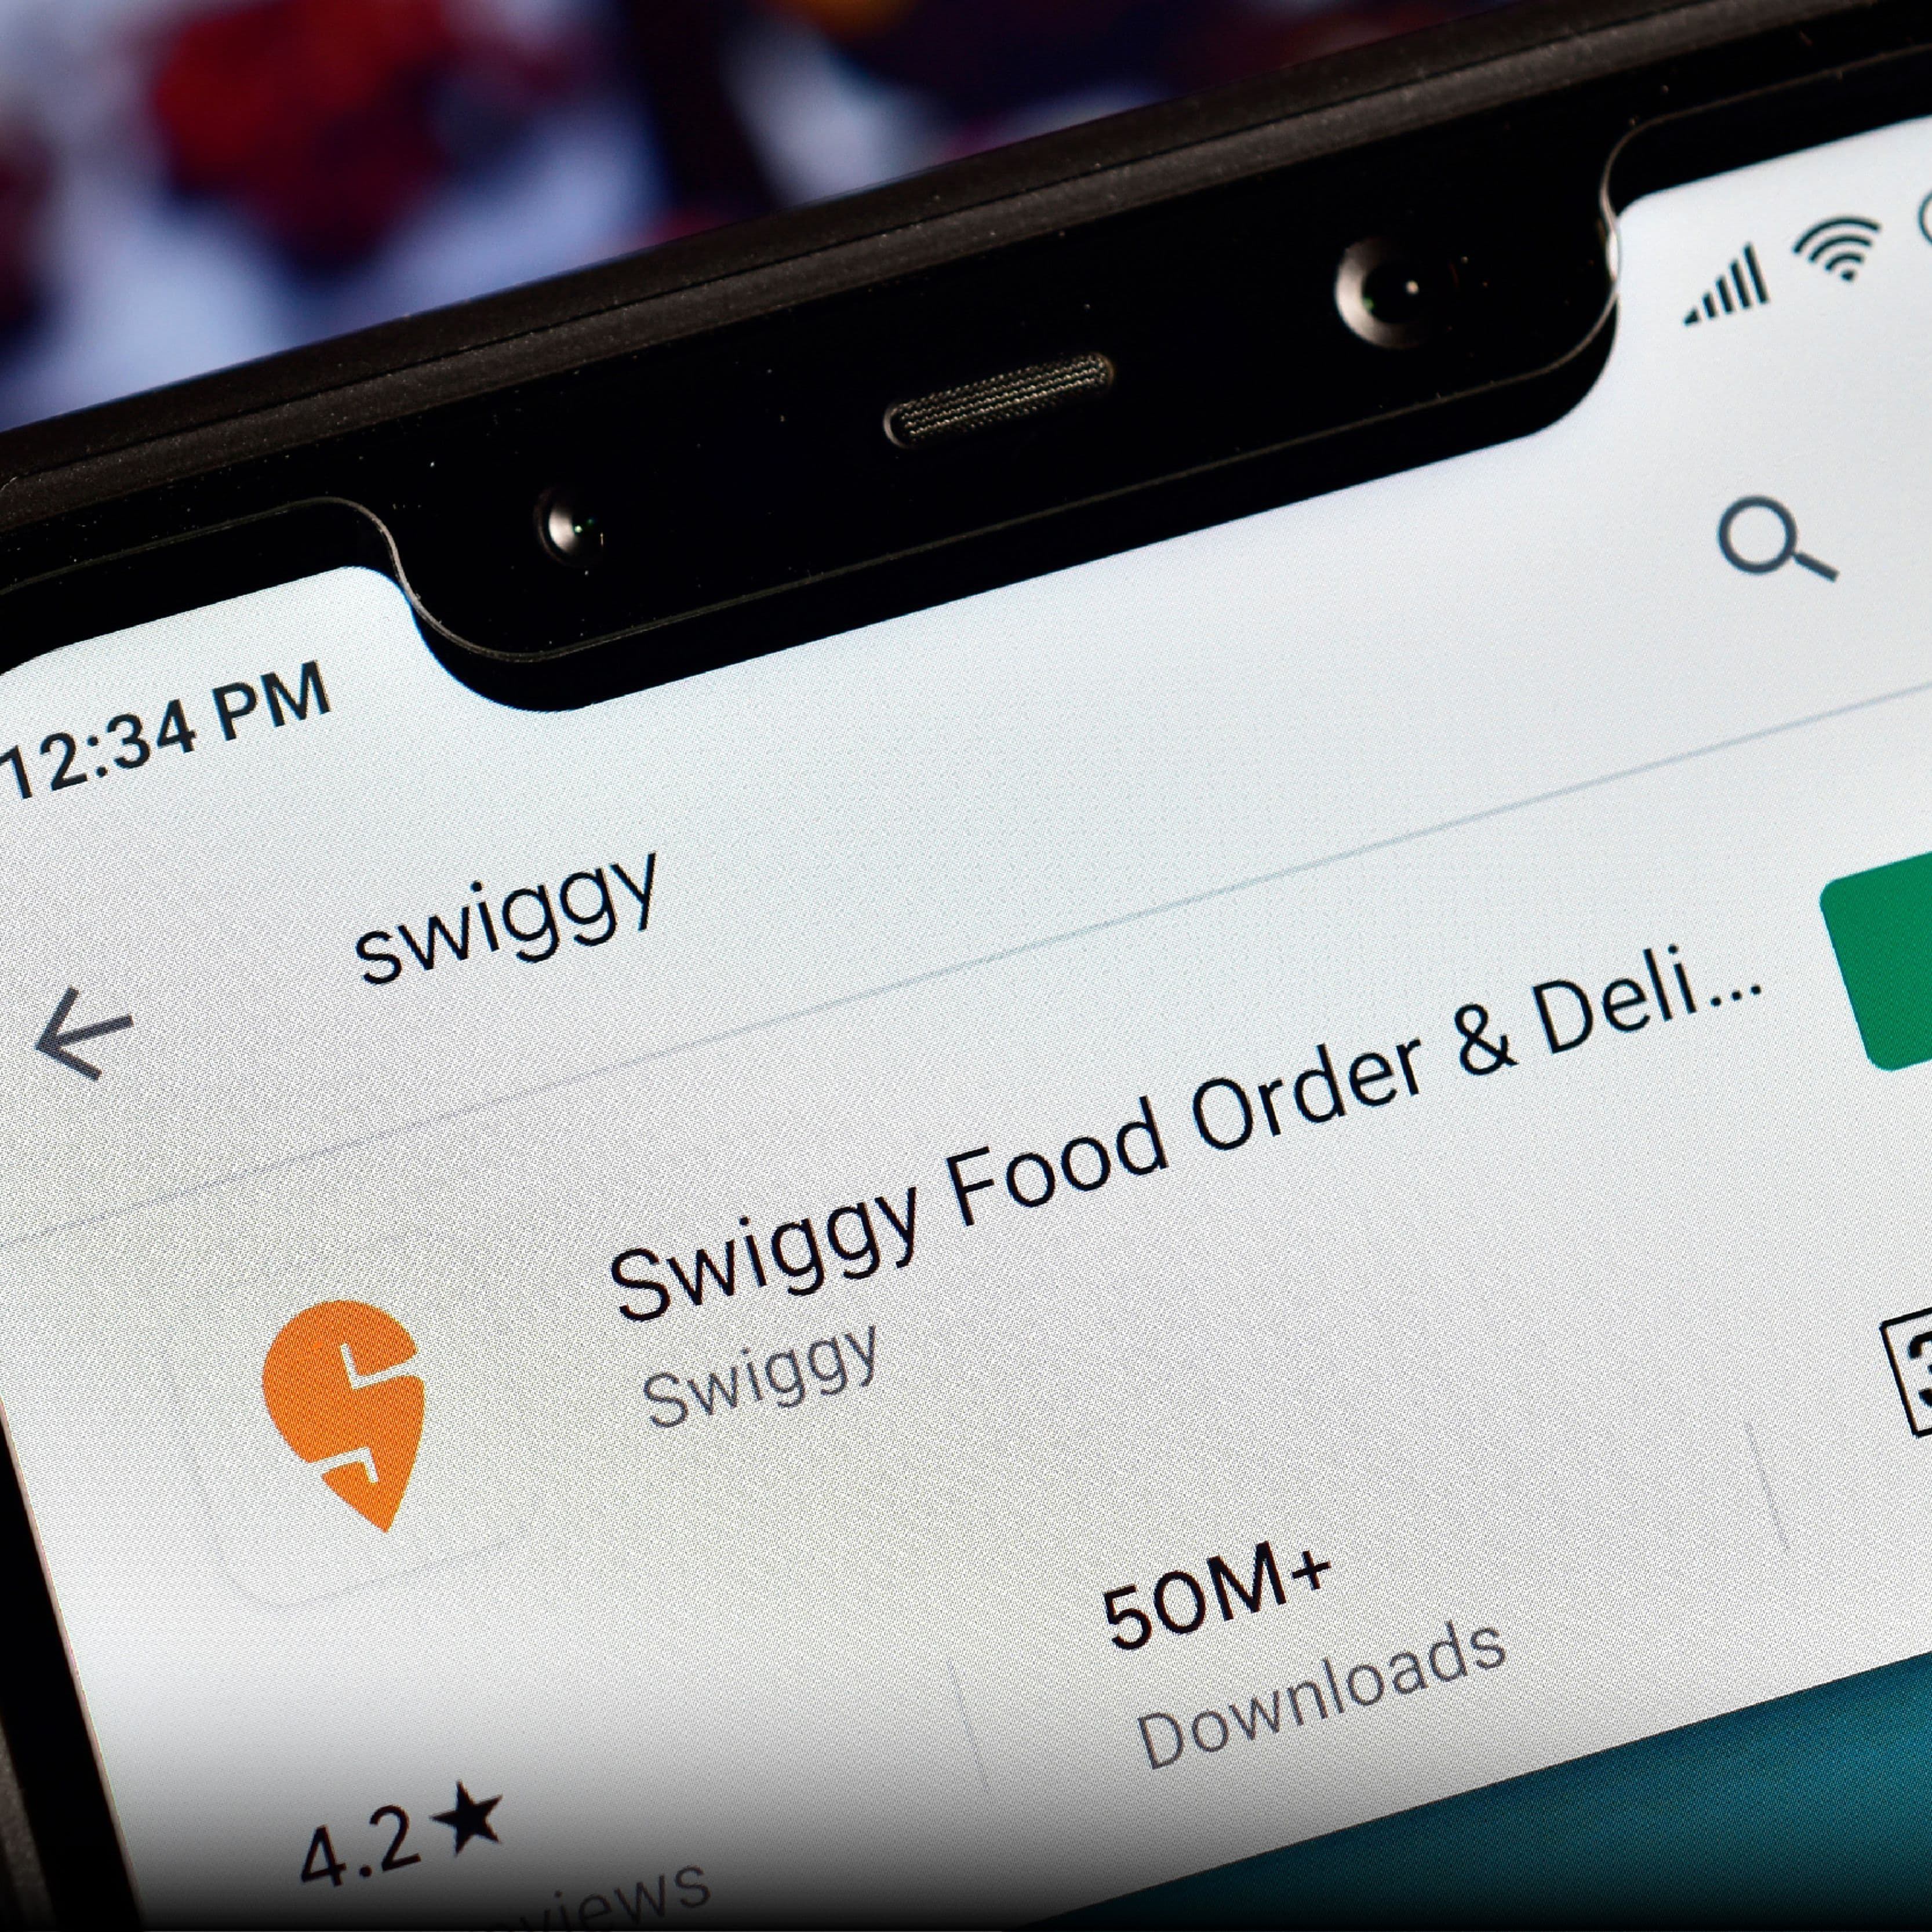 Swiggy's new AI feature to enable voice search, tailored recommendations